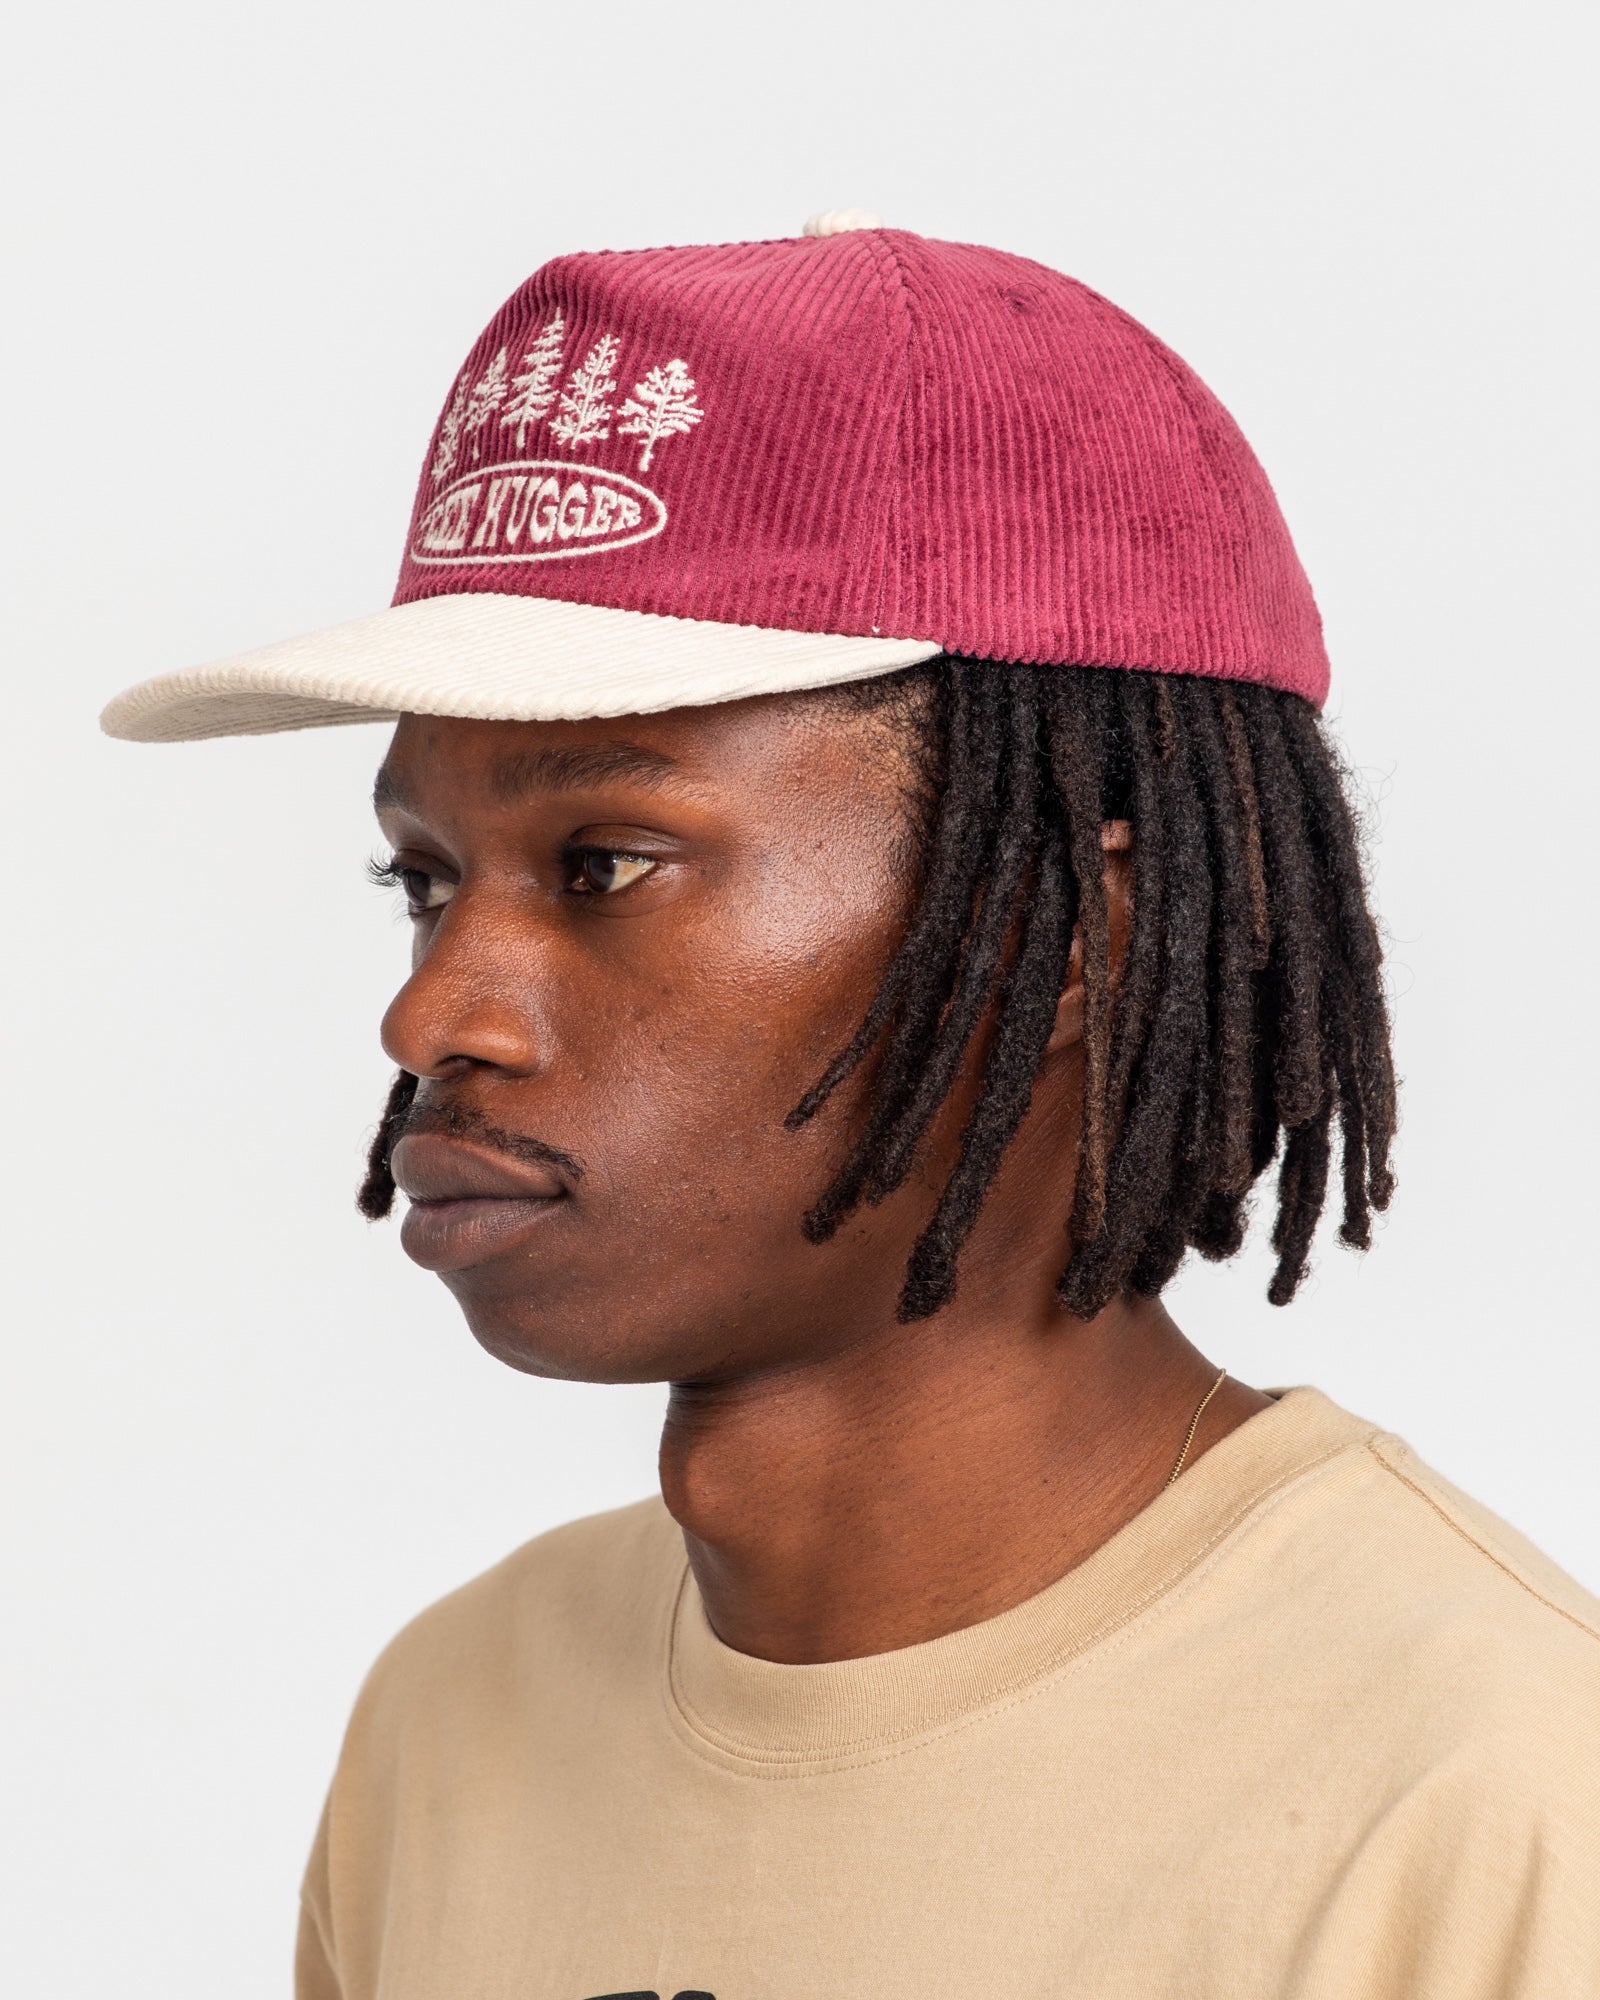 Shop Tree Hugger Corduroy Cap for Nature Lovers – Parks Project